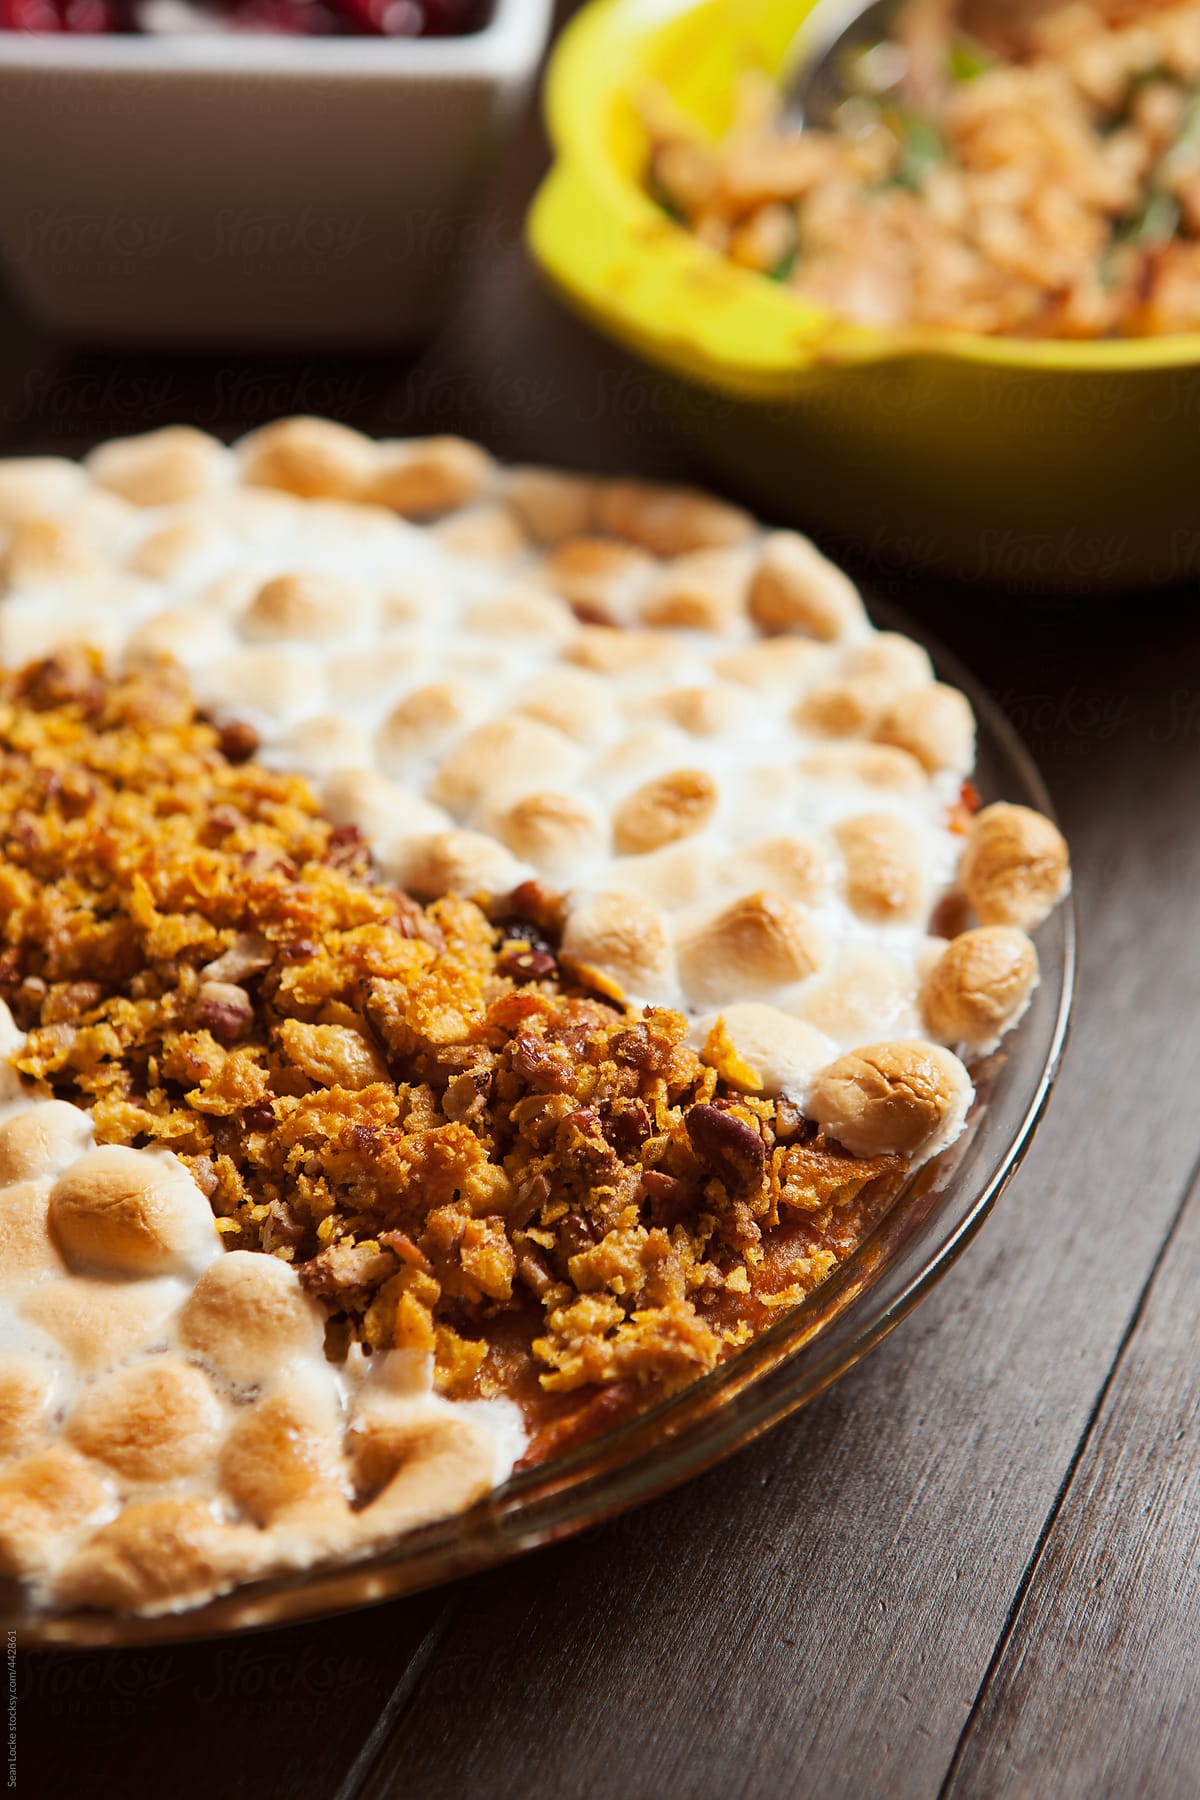 Thanksgiving: Sweet Potato Casserole With Marshmallows And Other Side Dishes